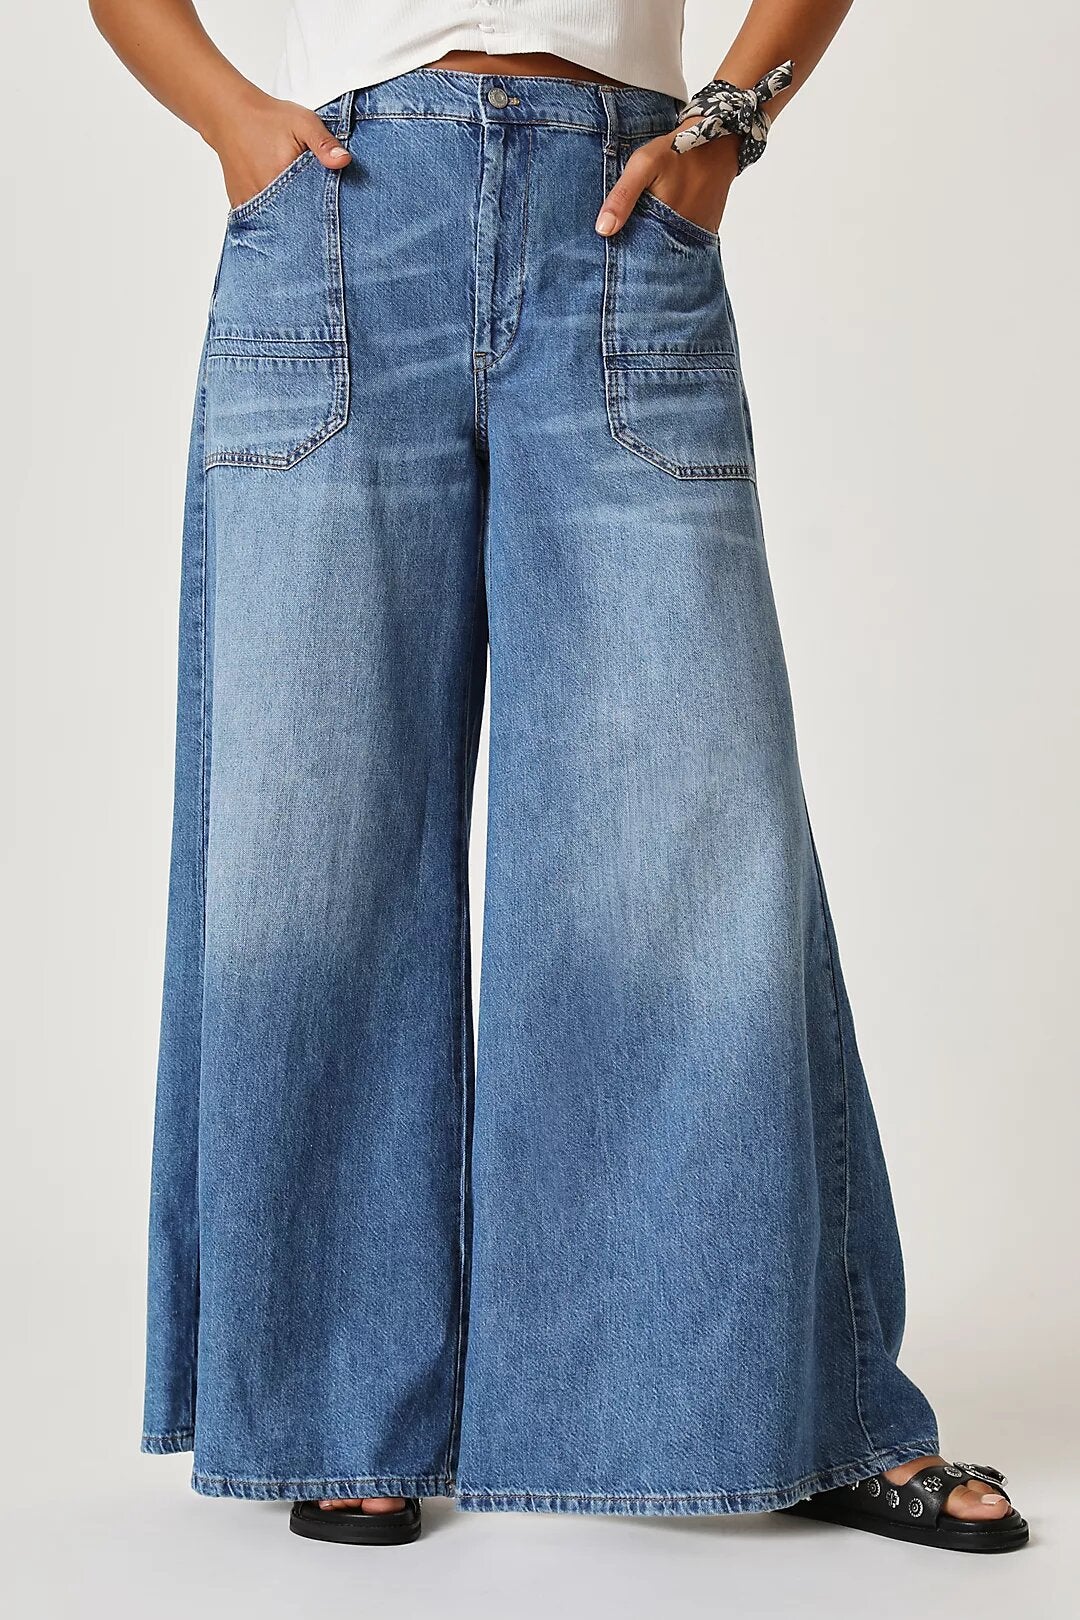 Anthropologie + Pilcro The Jane Ultra-High Rise Wide-Leg Jeans